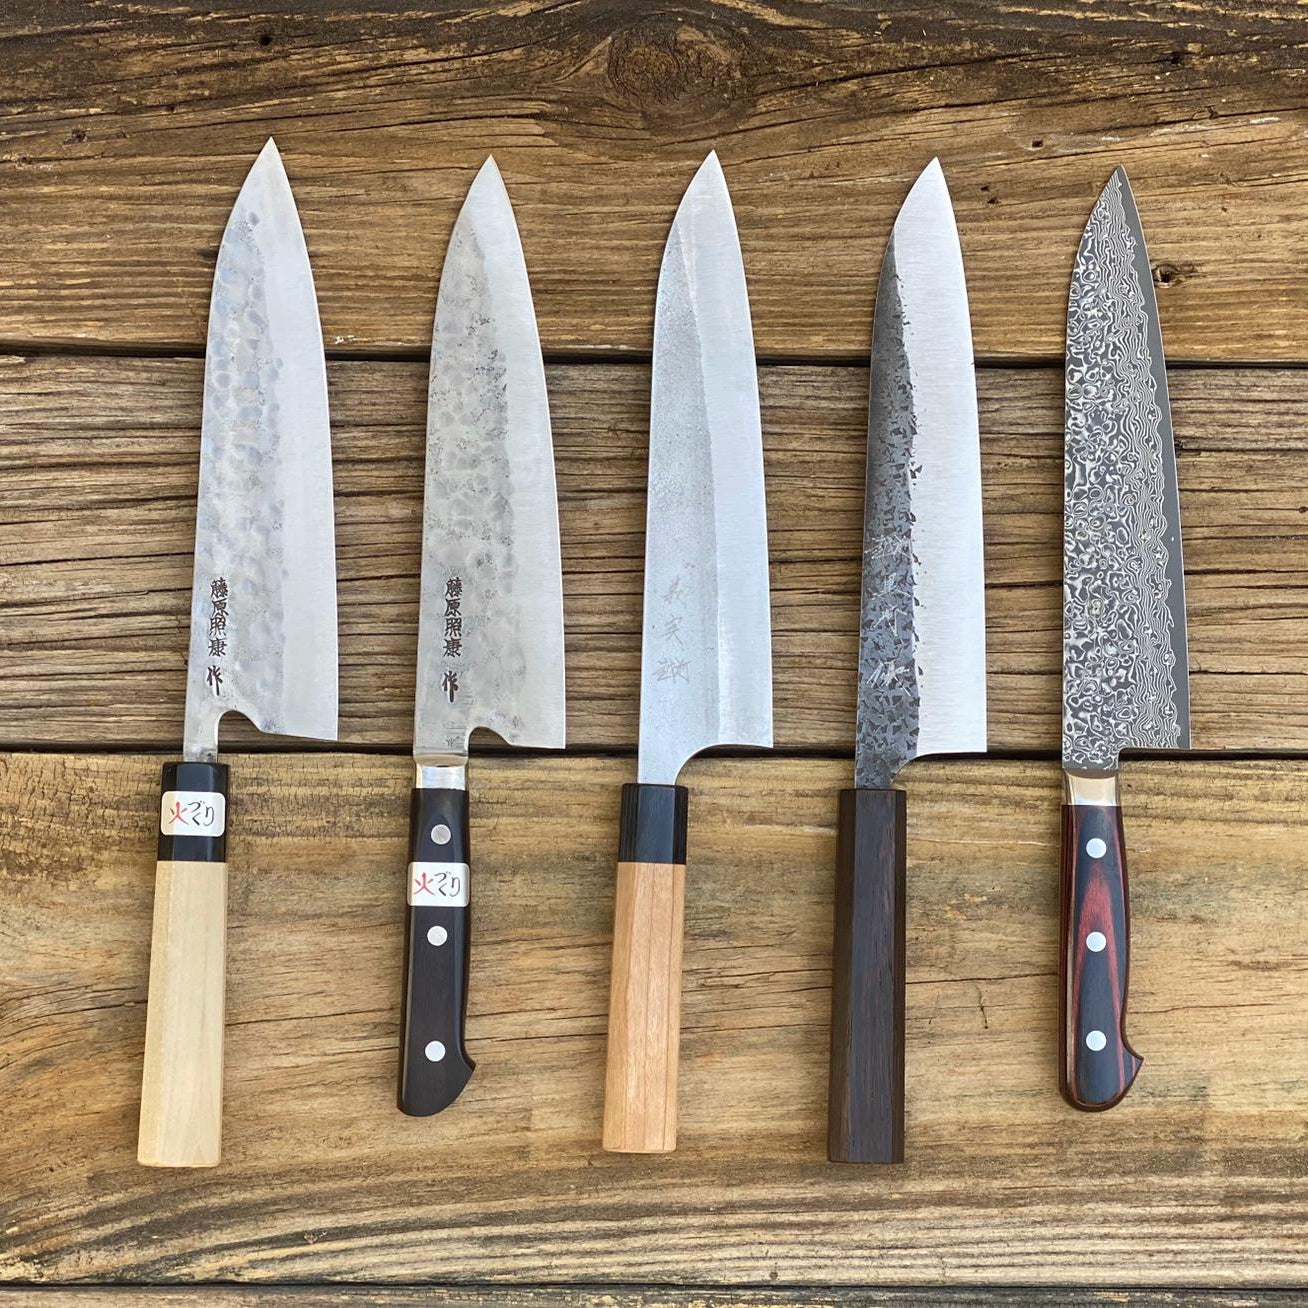 Global Miscellaneous Knives, Cleaver, Cheese